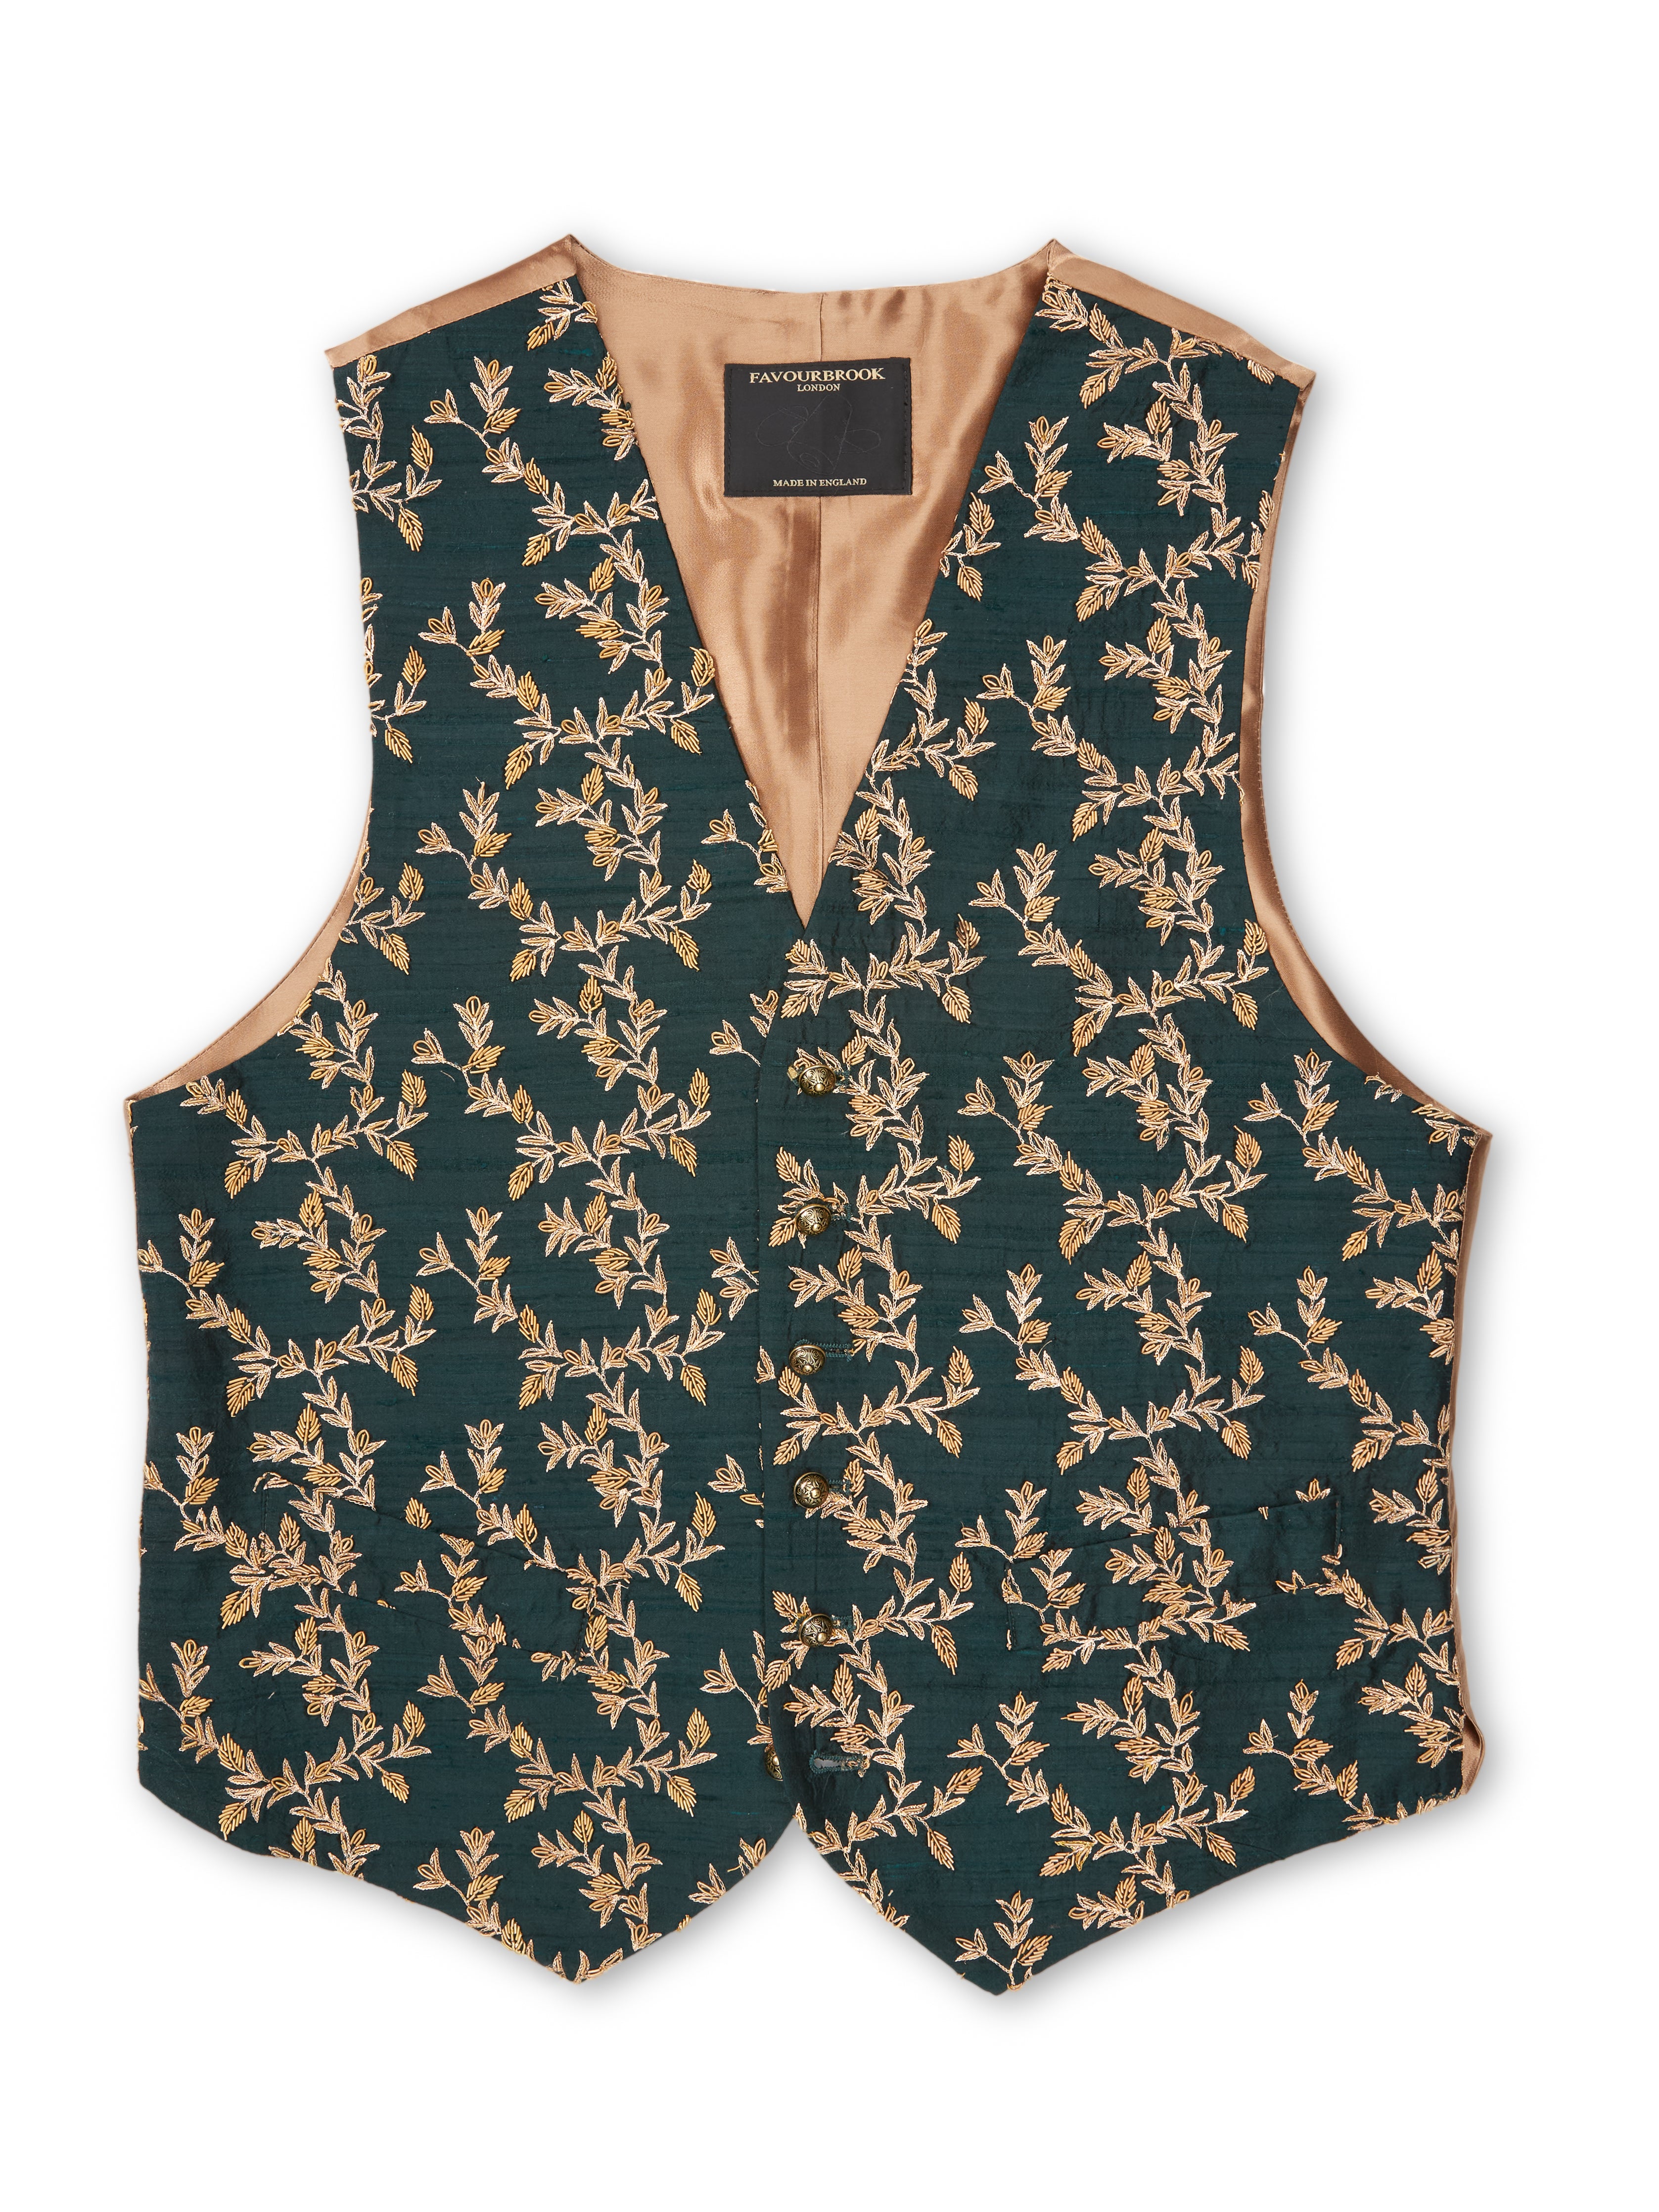 Teal Gold Leaf Brocade Single Breasted 6 Button Waistcoat